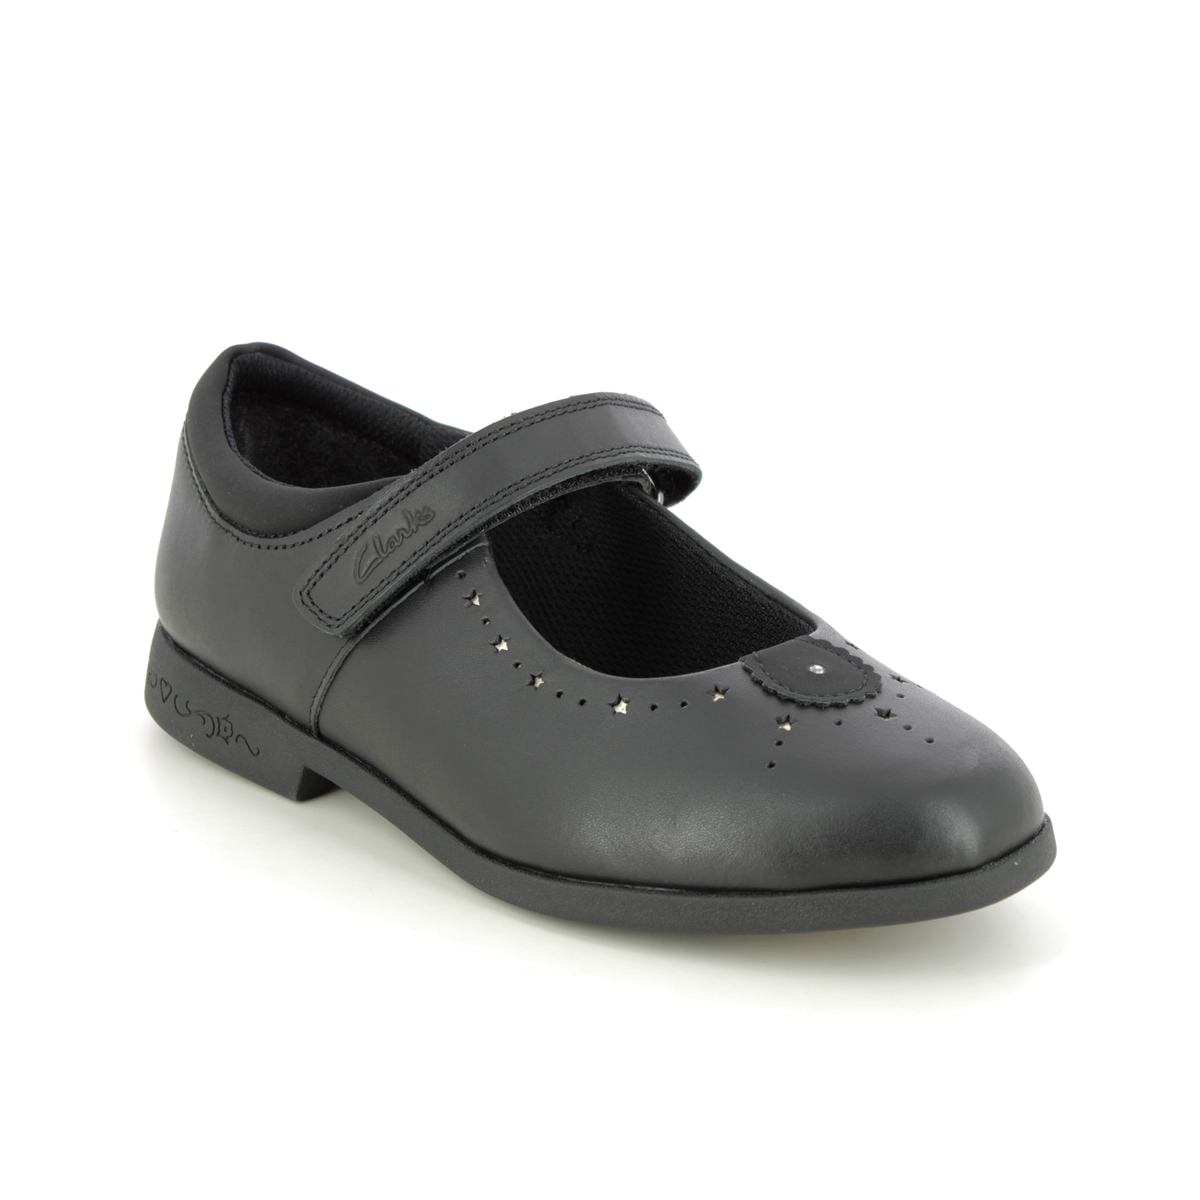 Clarks Magic Step Mj O Black Leather Kids Girls School Shoes 697057G In Size 13 In Plain Black Leather G Width Fitting For School For kids